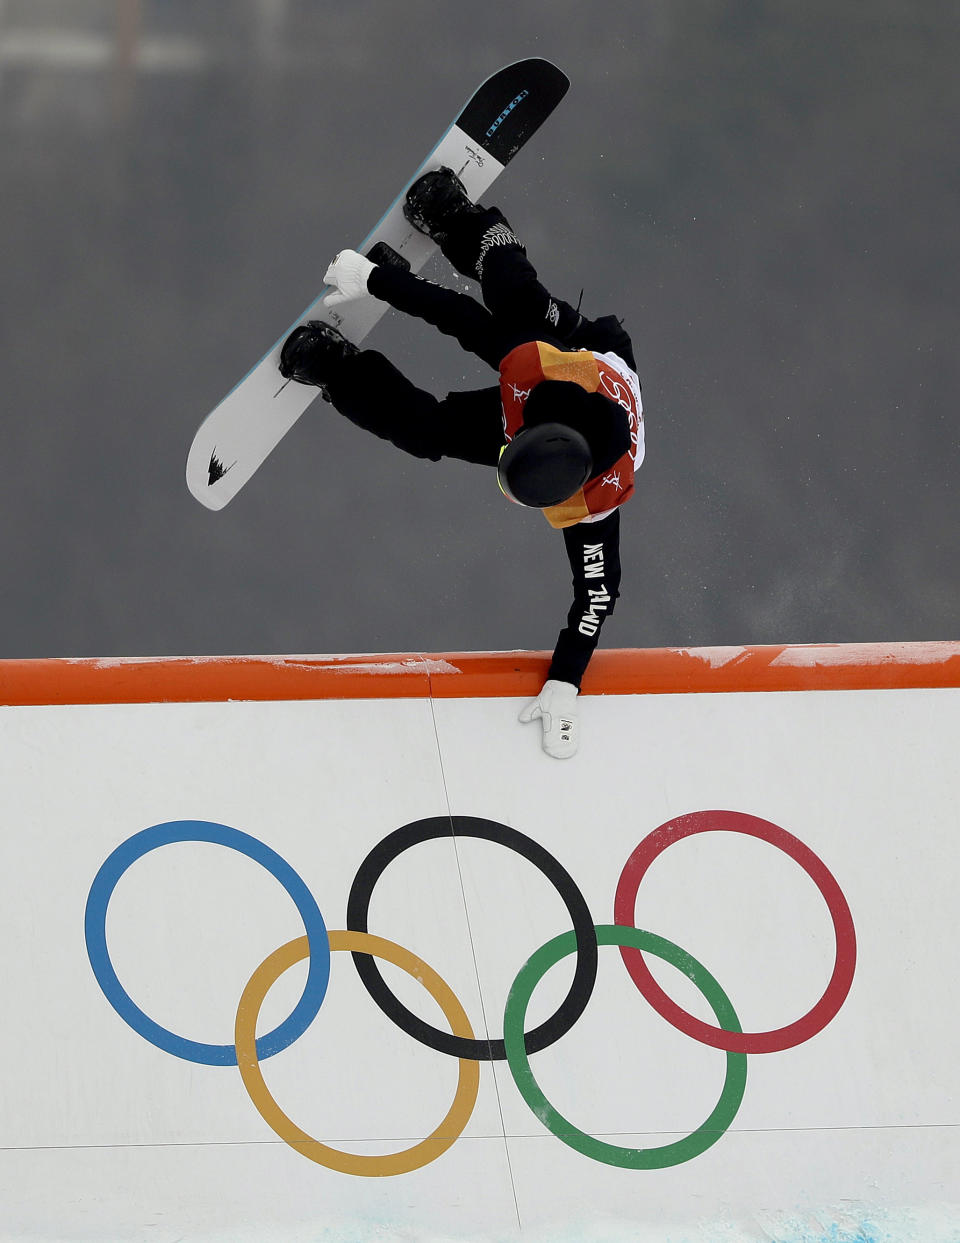 <p>Carlos Garcia Knight, of New Zealand, runs the course during the men’s slopestyle qualifying at Phoenix Snow Park at the 2018 Winter Olympics in Pyeongchang, South Korea, Saturday, Feb. 10, 2018. (AP Photo/Gregory Bull) </p>